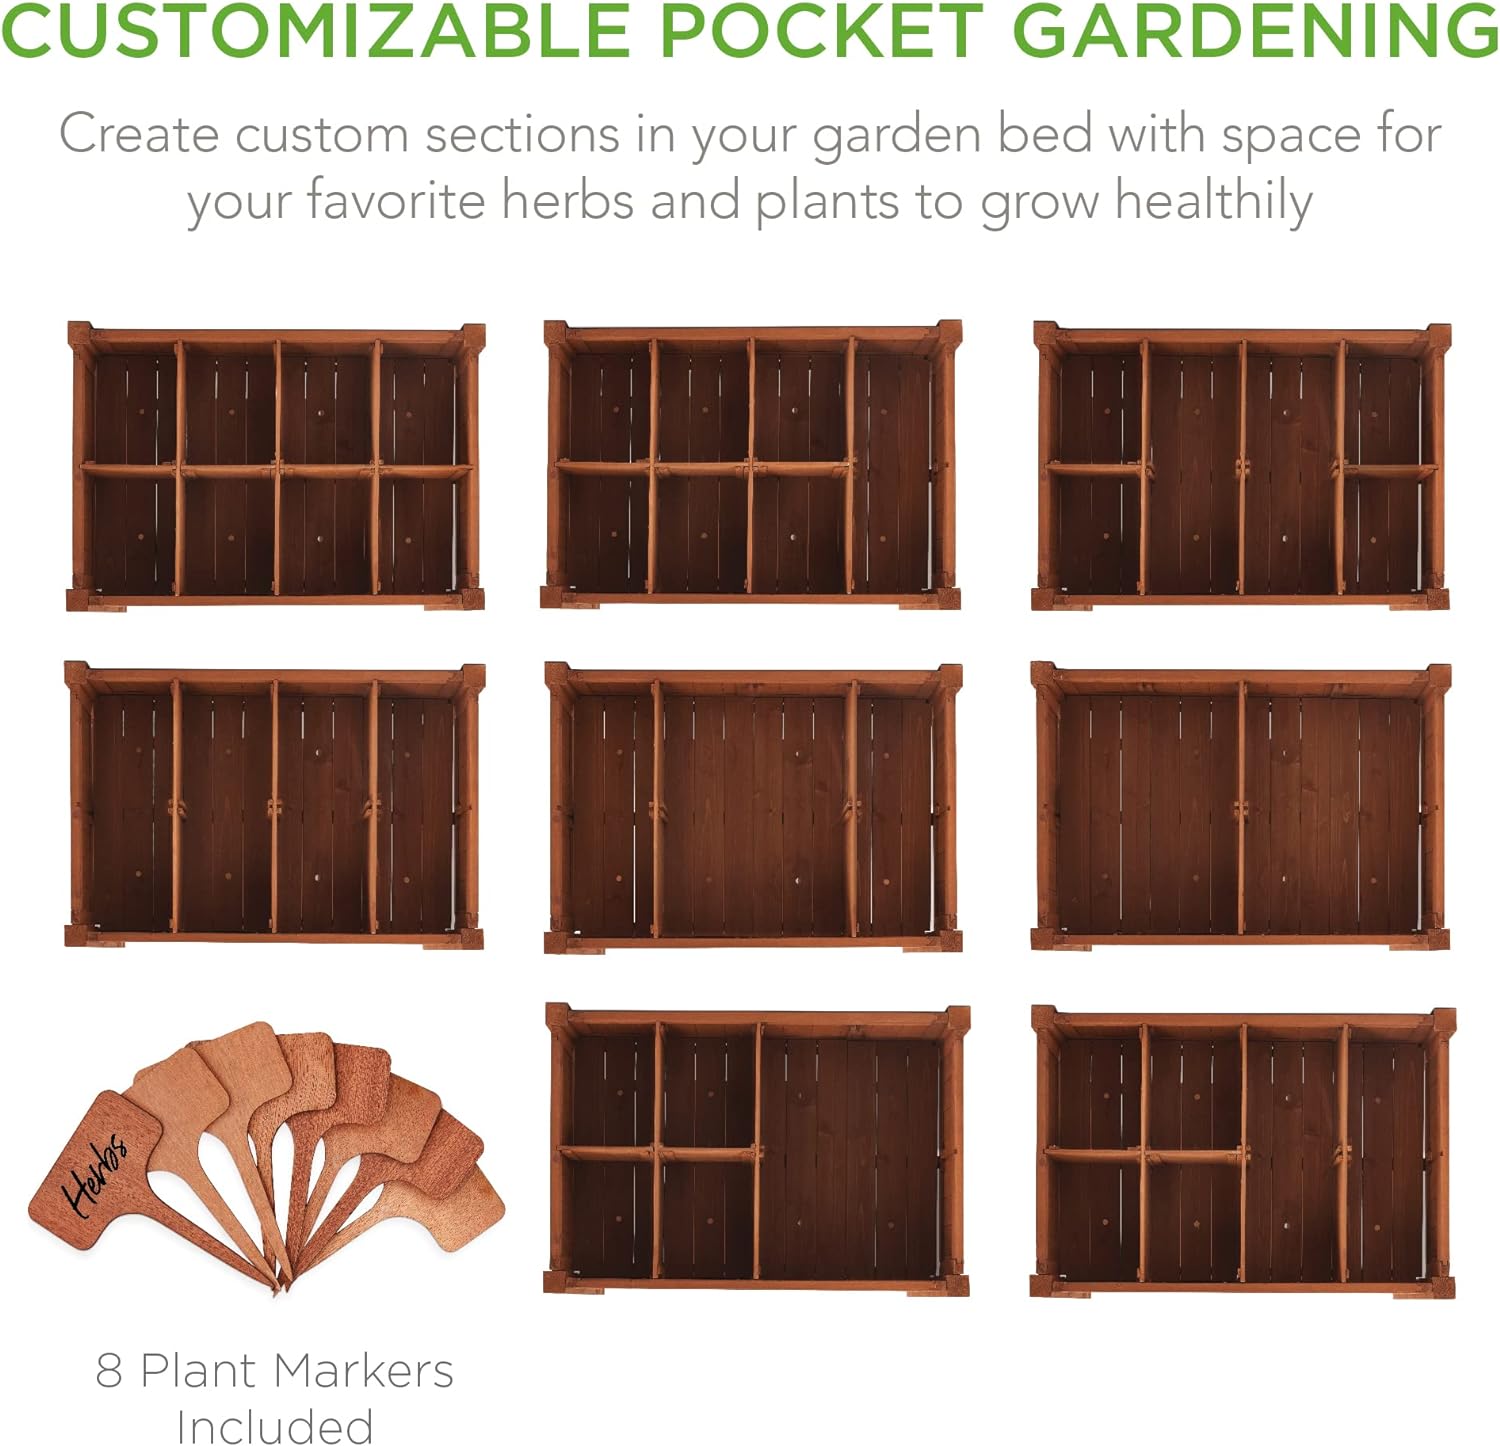 Best Choice Products Elevated 8 Pocket Herb Garden Bed Mobile Raised Customizable Wood Planter